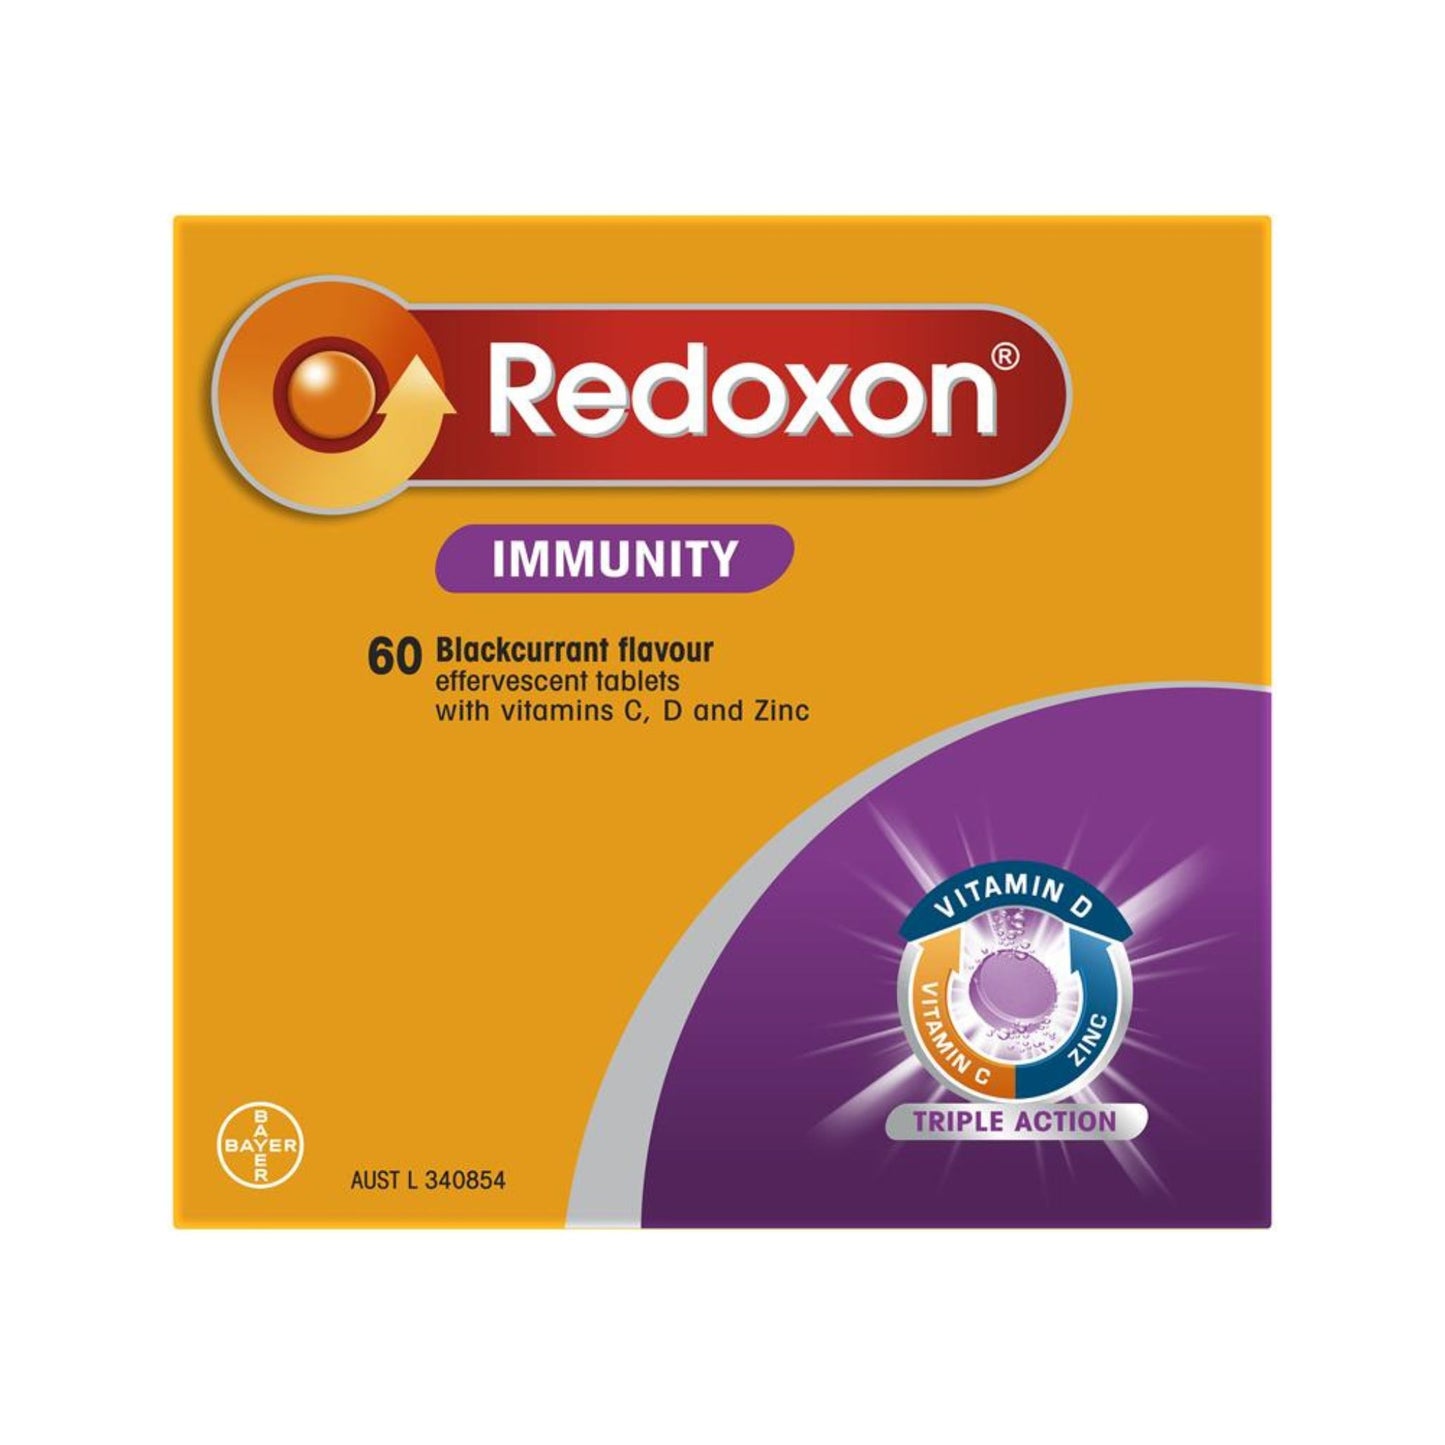 Redoxon Immunity Vitamin C, D and Zinc Blackcurrant Flavoured Effervescent Tablets 60 pack